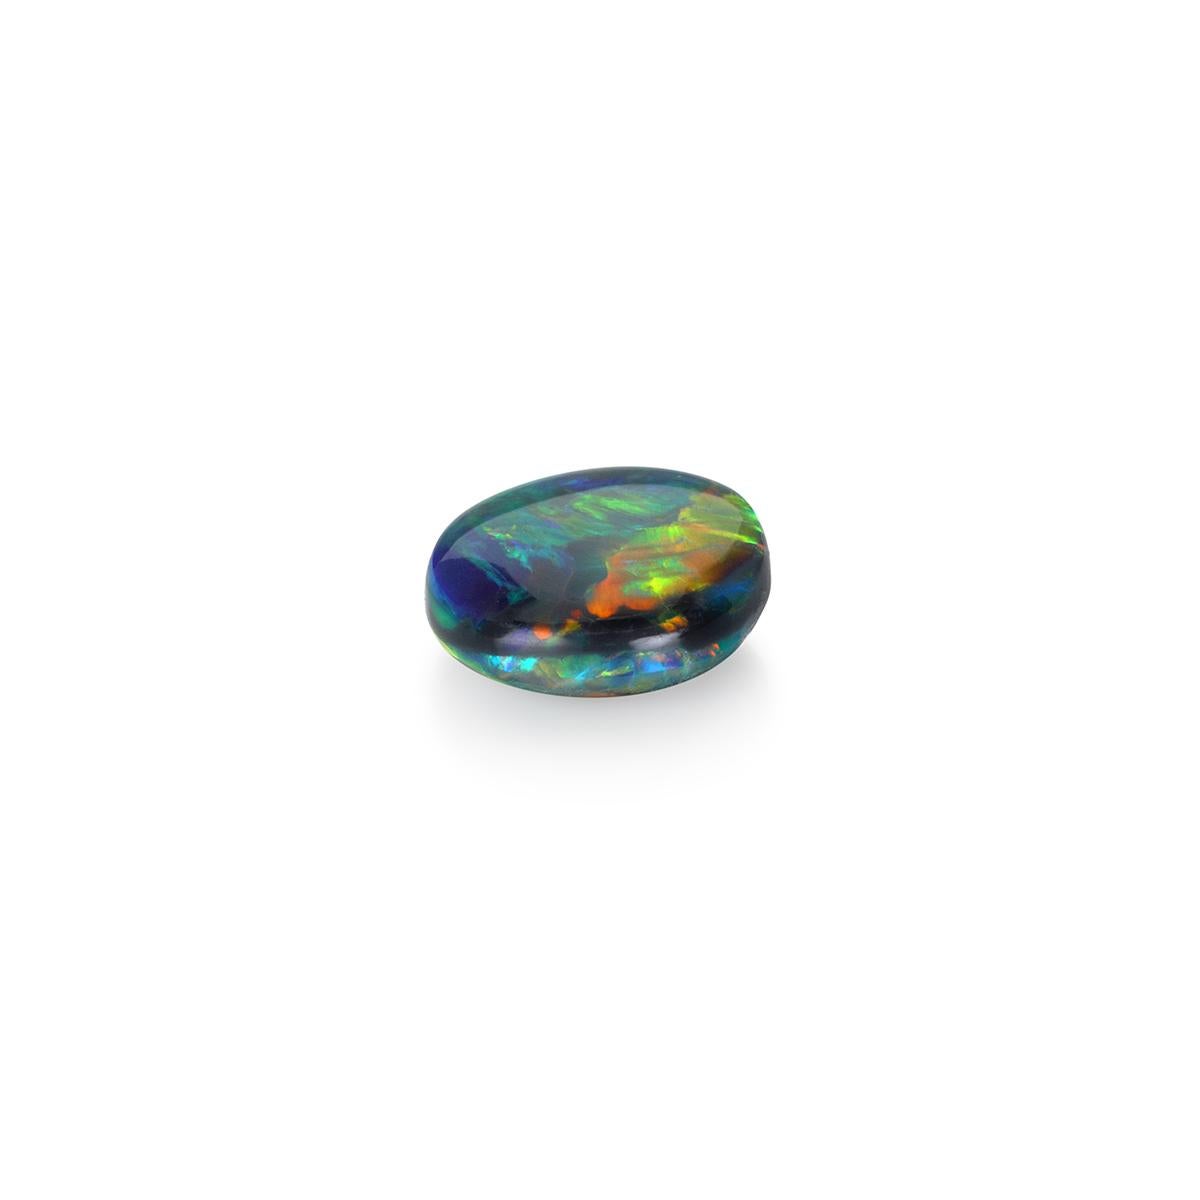 Spectacular in color and shape and exhibiting a stunning range of colors, this 2.80 carat natural black opal is a gem-quality stone for the avid collector or jewelry lover. 

Unlike ordinary opals, black opals have carbon and iron oxide trace